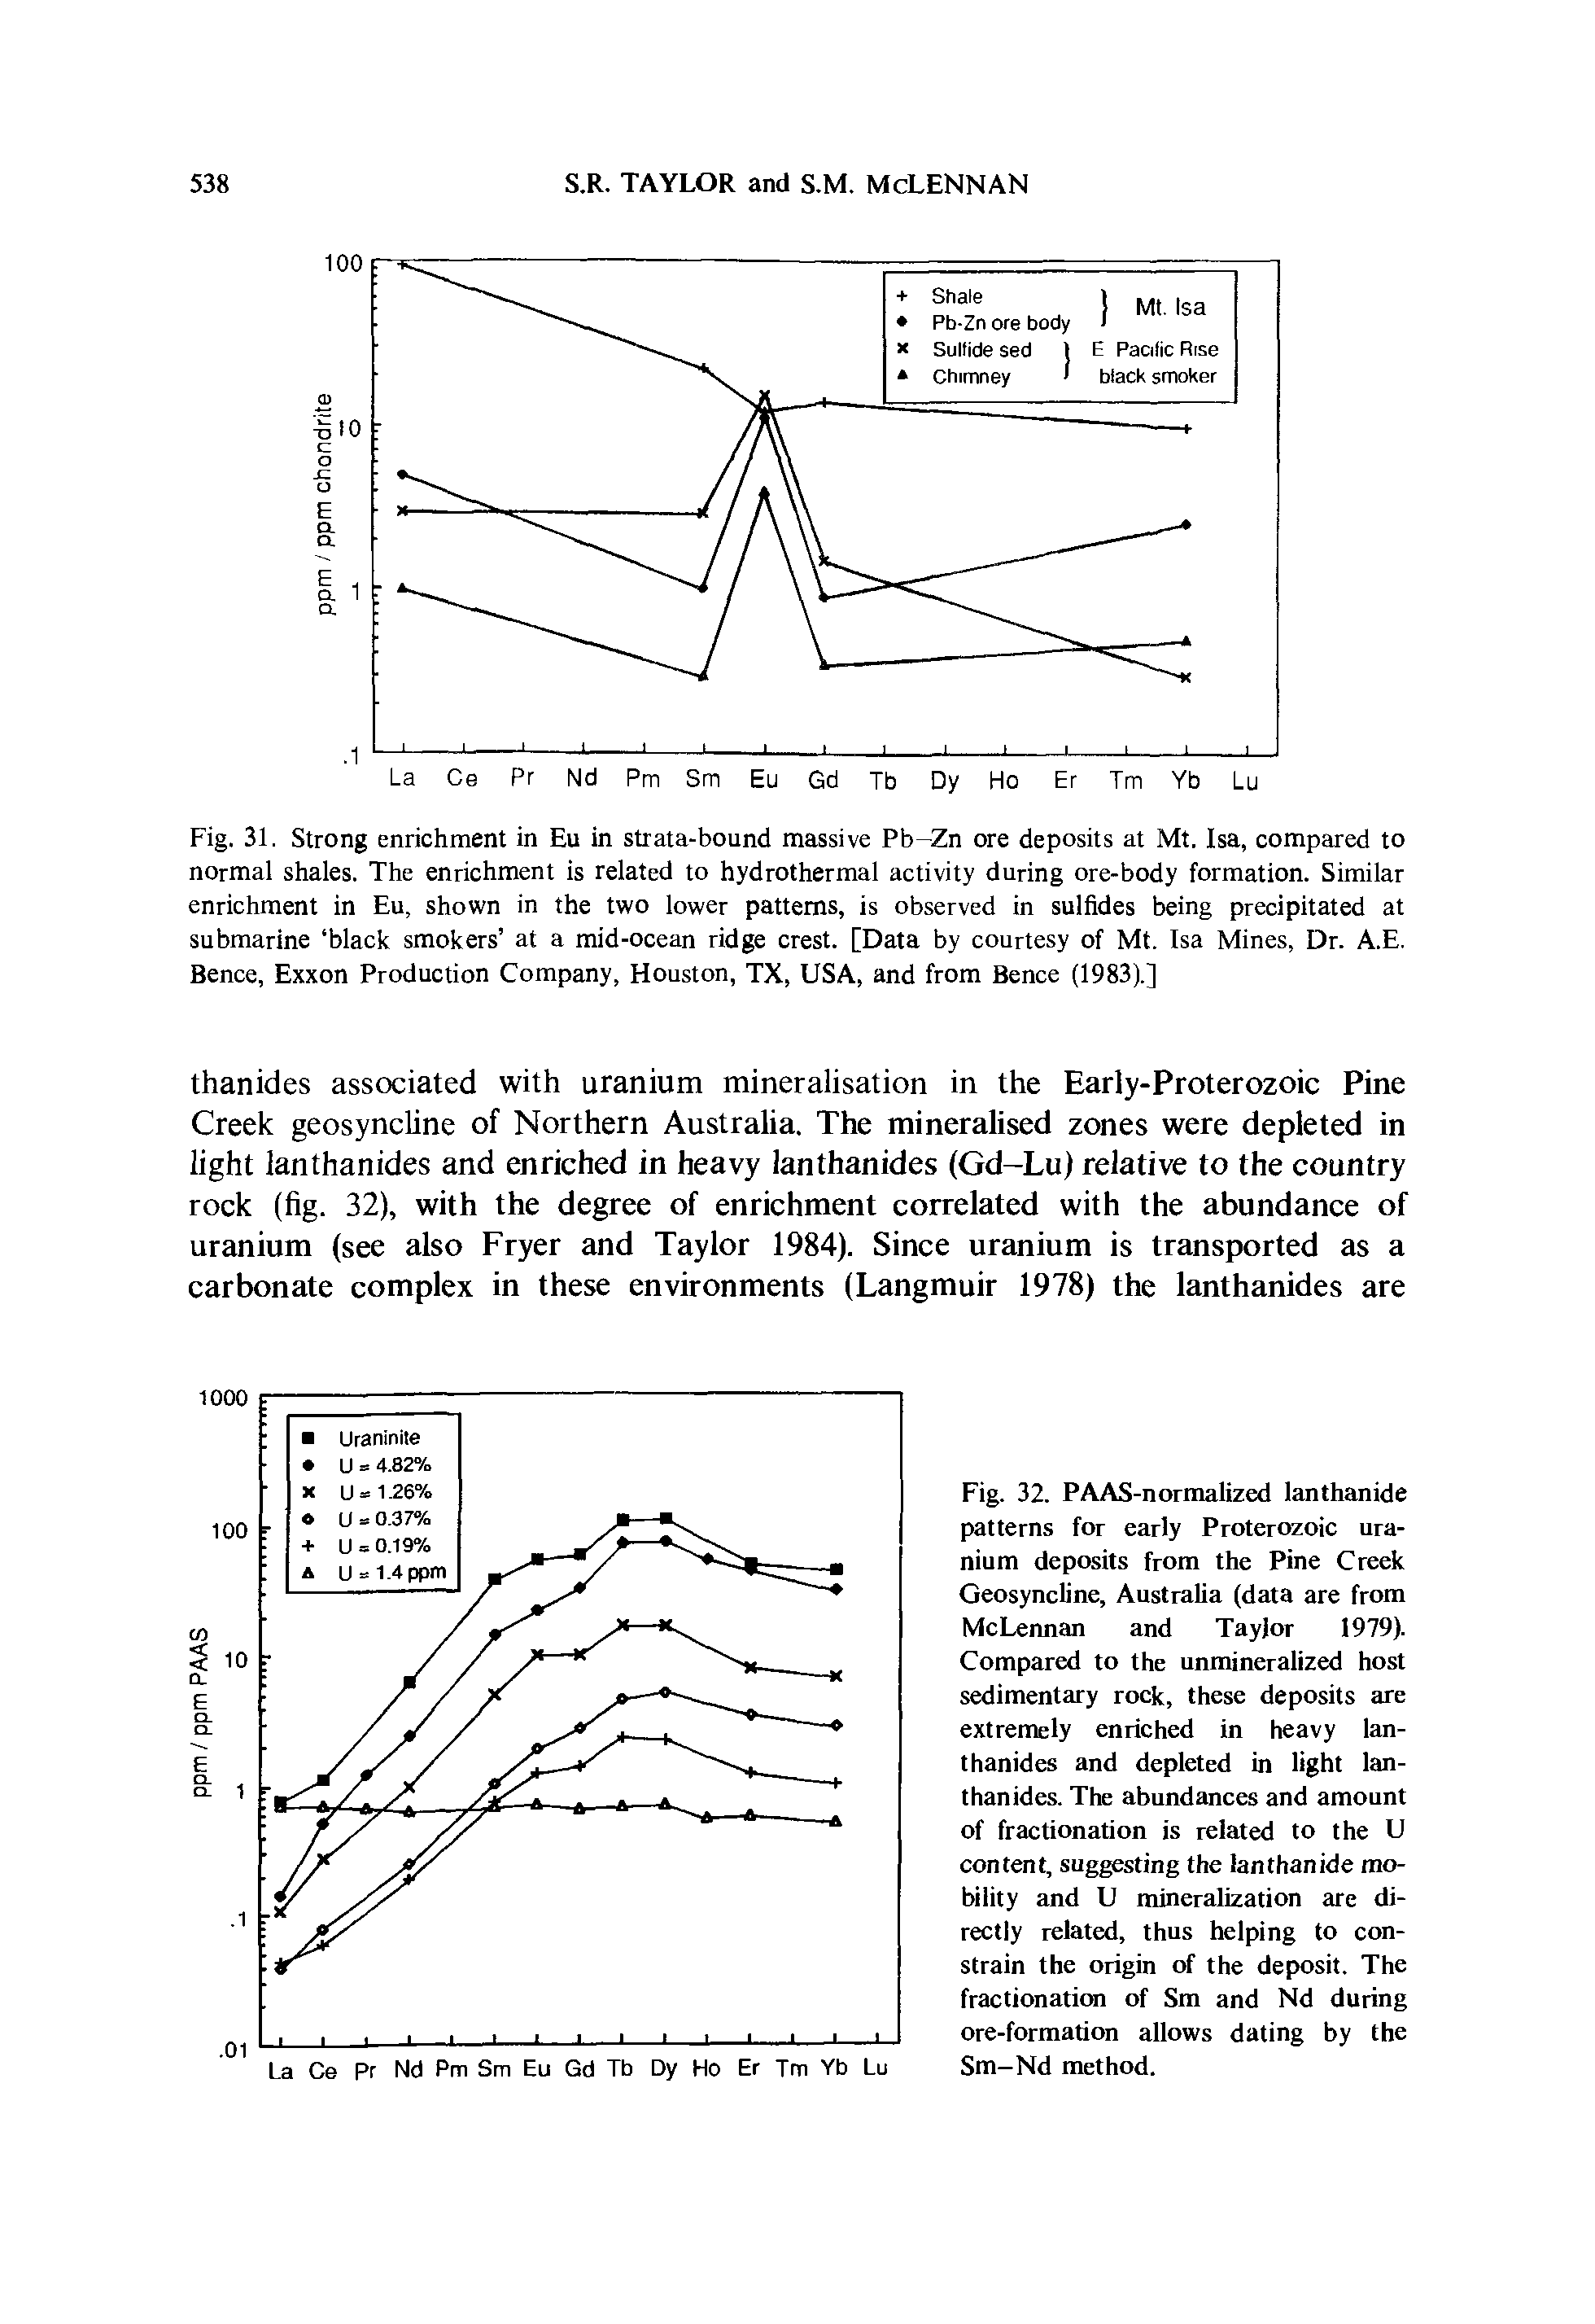 Fig. 32. PAAS-normalized lanthanide patterns for early Proterozoic uranium deposits from the Pine Creek Geosyneline, Australia (data are from McLennan and Taylor 1979). Compared to the unmineralized host sedimentary roek, these deposits are extremely enriched in heavy lanthanides and depleted in light lanthanides. The abundances and amount of fractionation is related to the U content, suggesting the lanthanide mobility and U mineralization are directly related, thus helping to constrain the origin of the deposit. The fractionation of Sm and Nd during ore-formation allows dating by the Sm-Nd method.